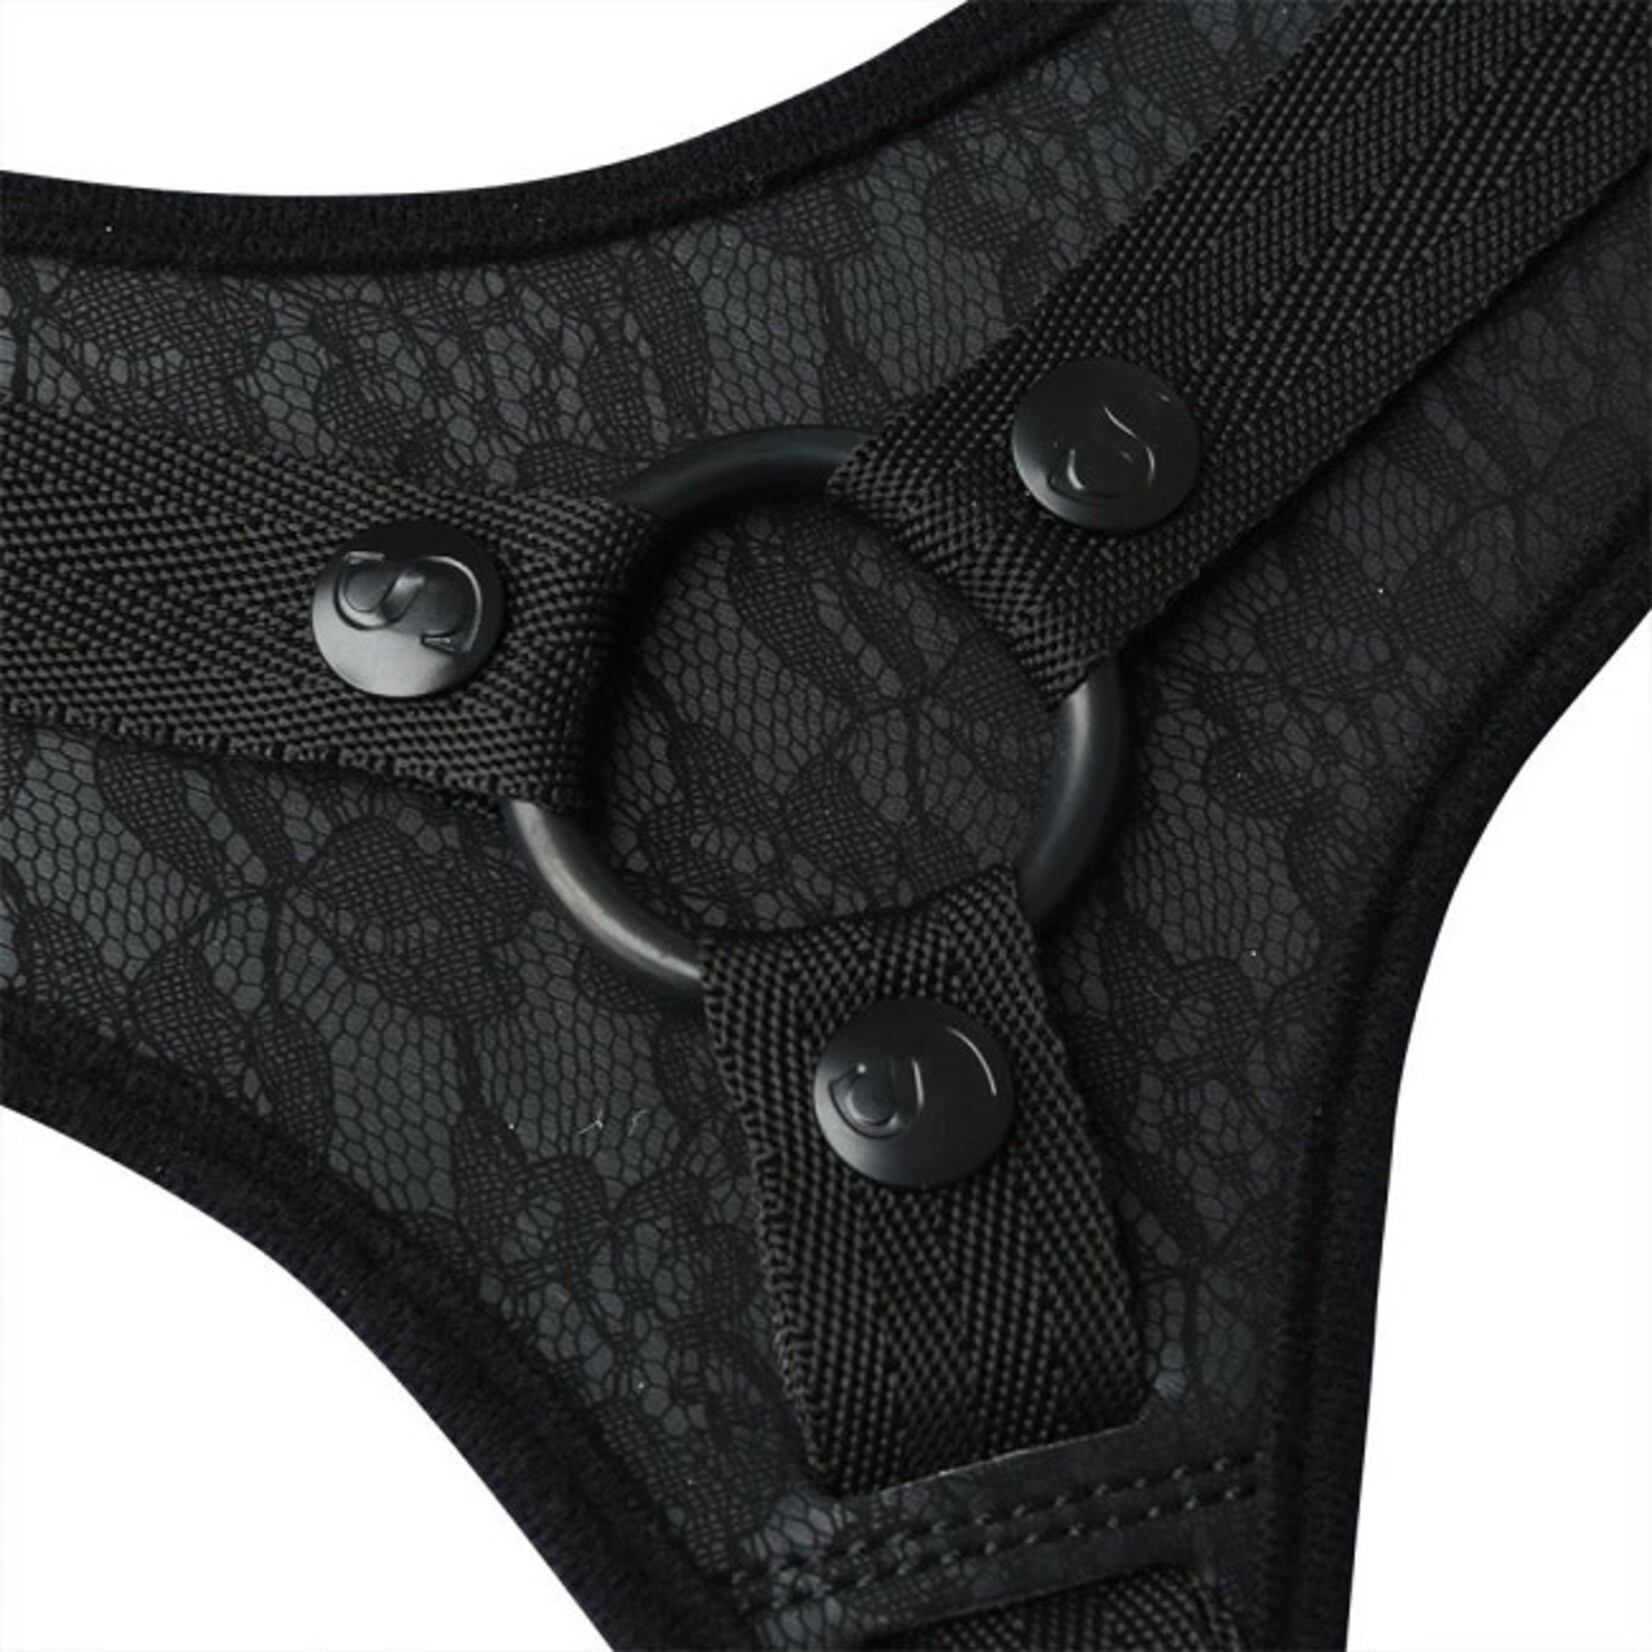 Sportsheets Sincerely, Sportsheets Lace Strap-On